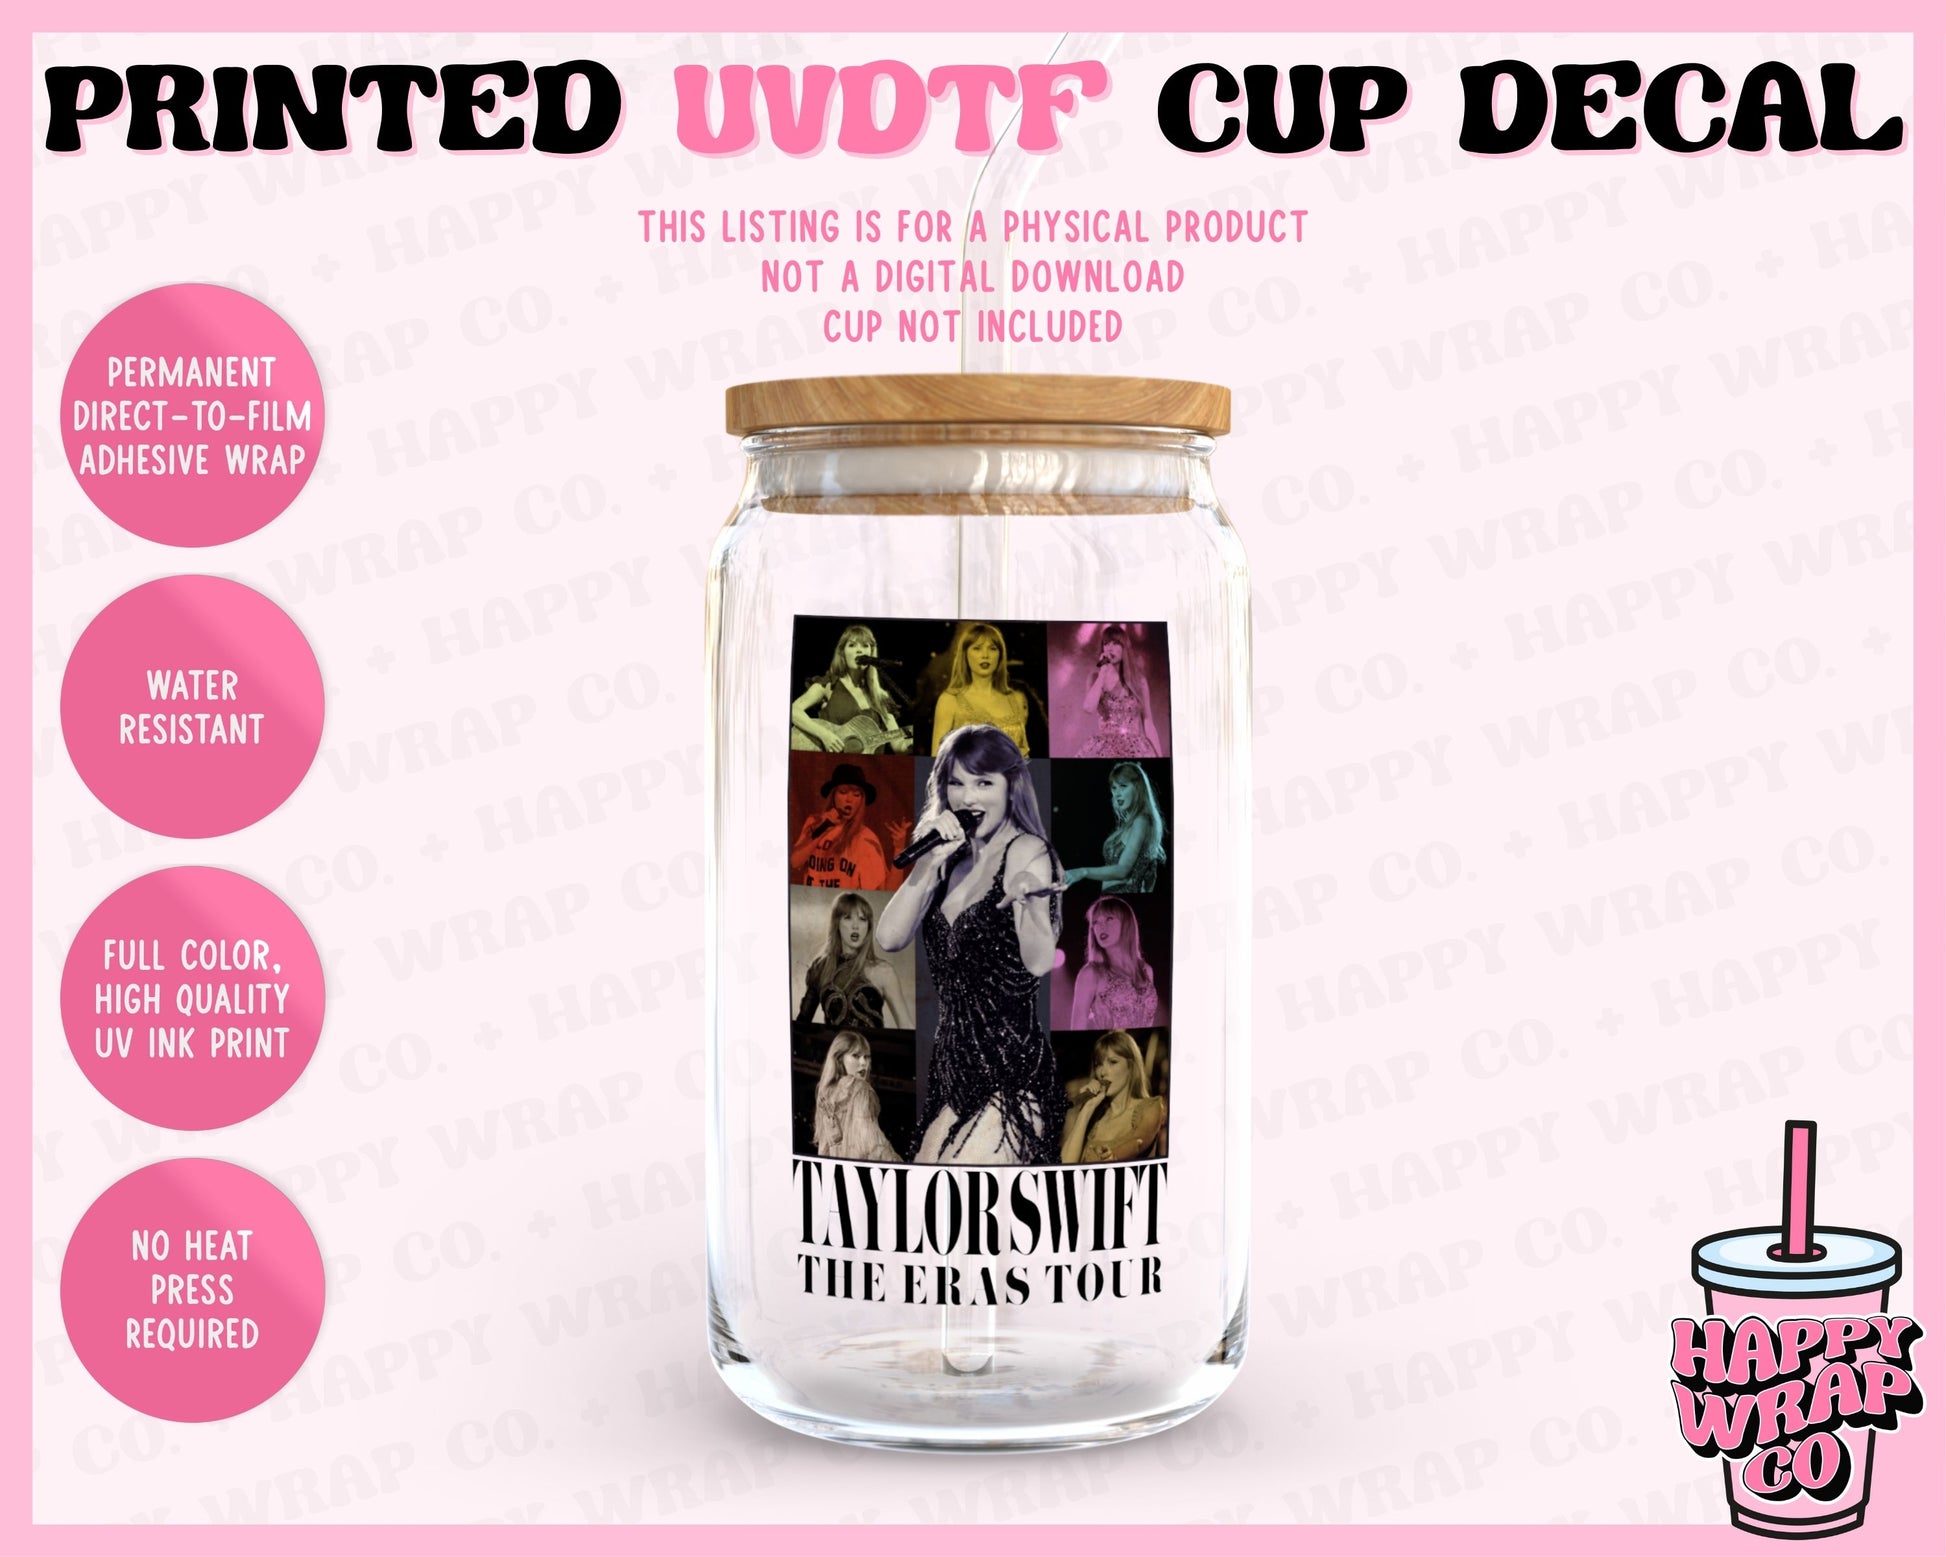 TS Eras Tour - UVDTF Cup Decal (Ready-to-Ship) – Happy Wrap Co.